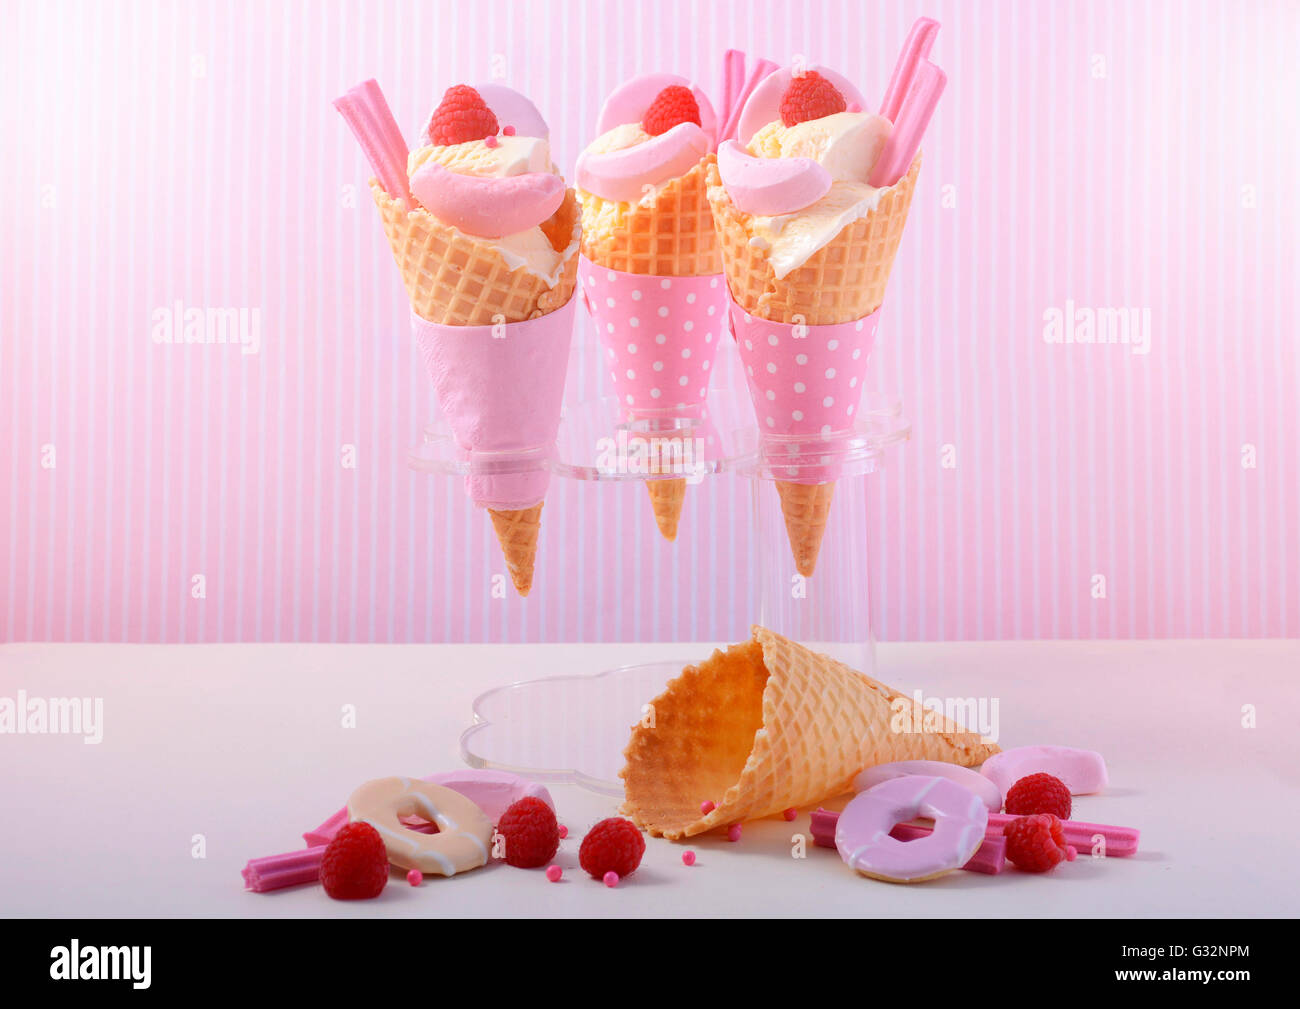 Summer is Here themed vanilla ice creams in wafer cones with pink candy decorations on a white wood table against a pink stripe  Stock Photo